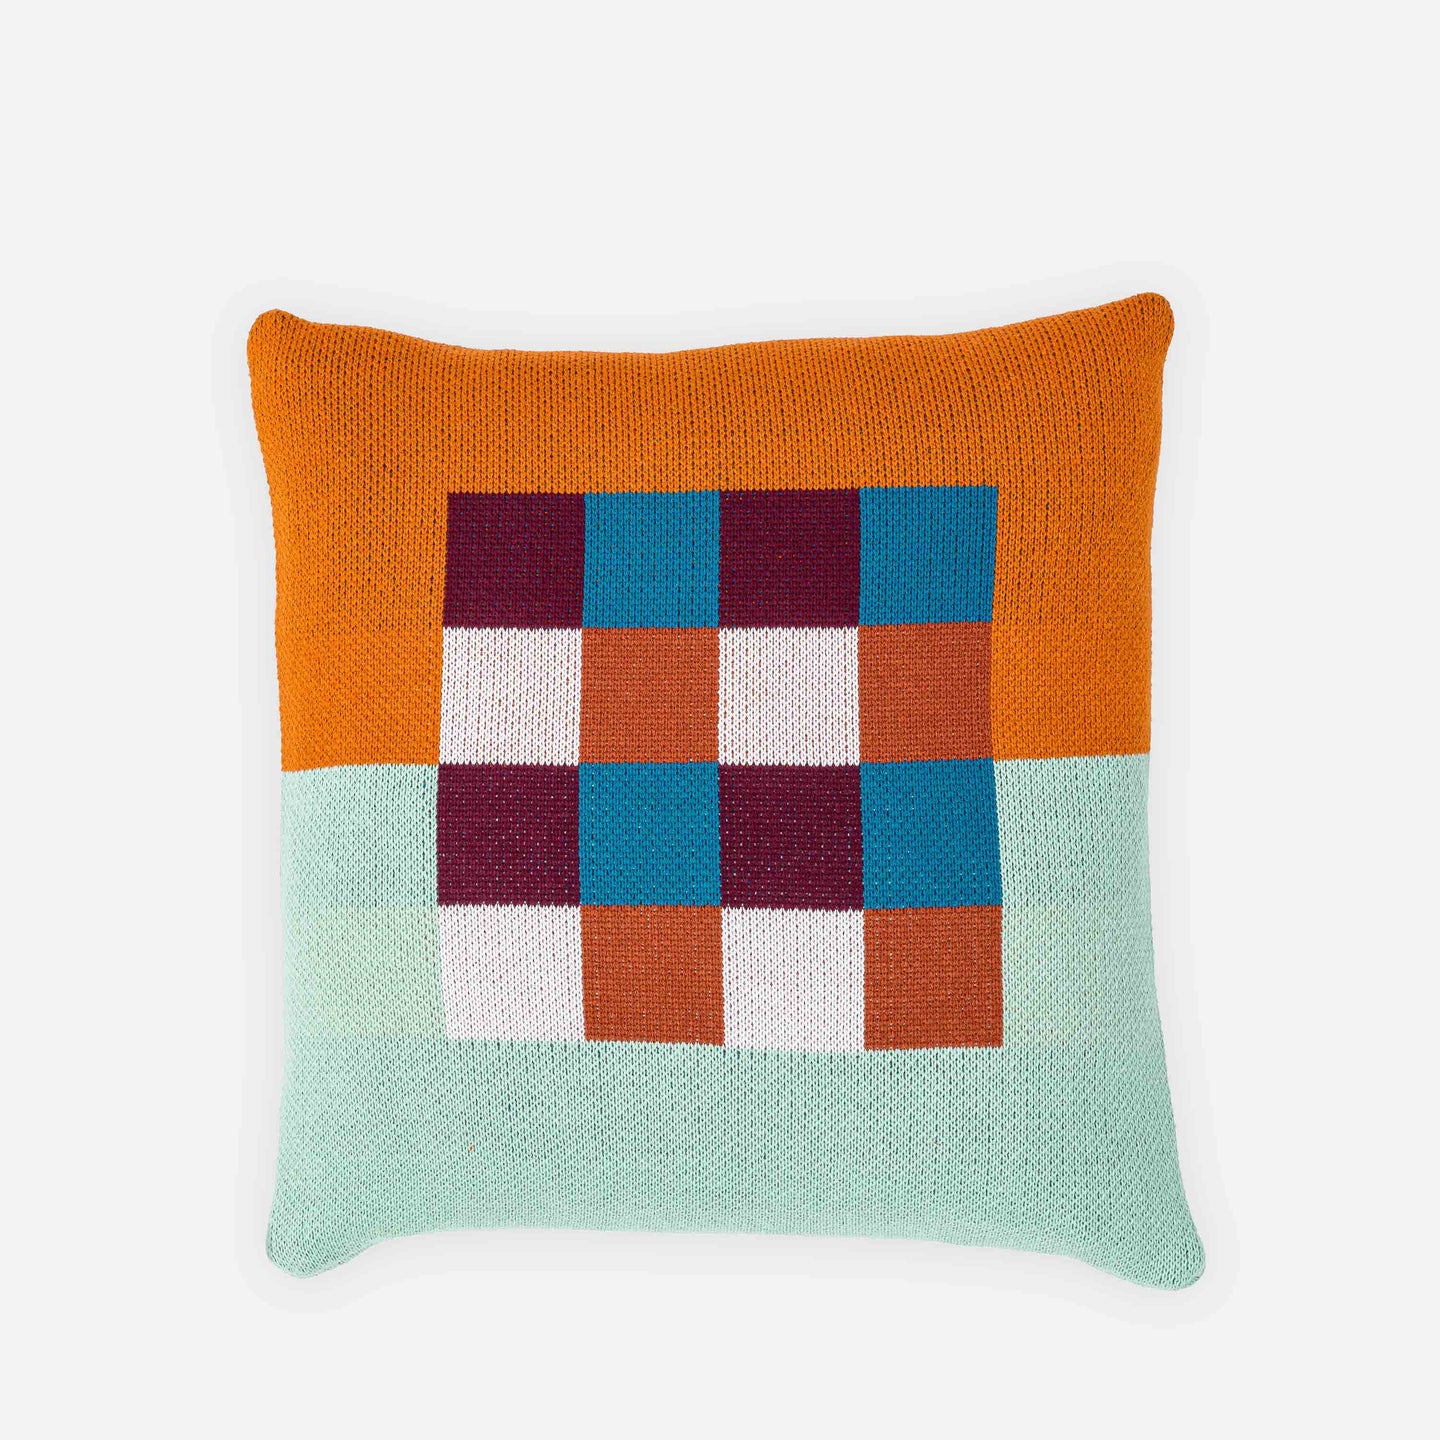 Knitted vibrant colors on the Gingham Checkerboard Pillow Cover